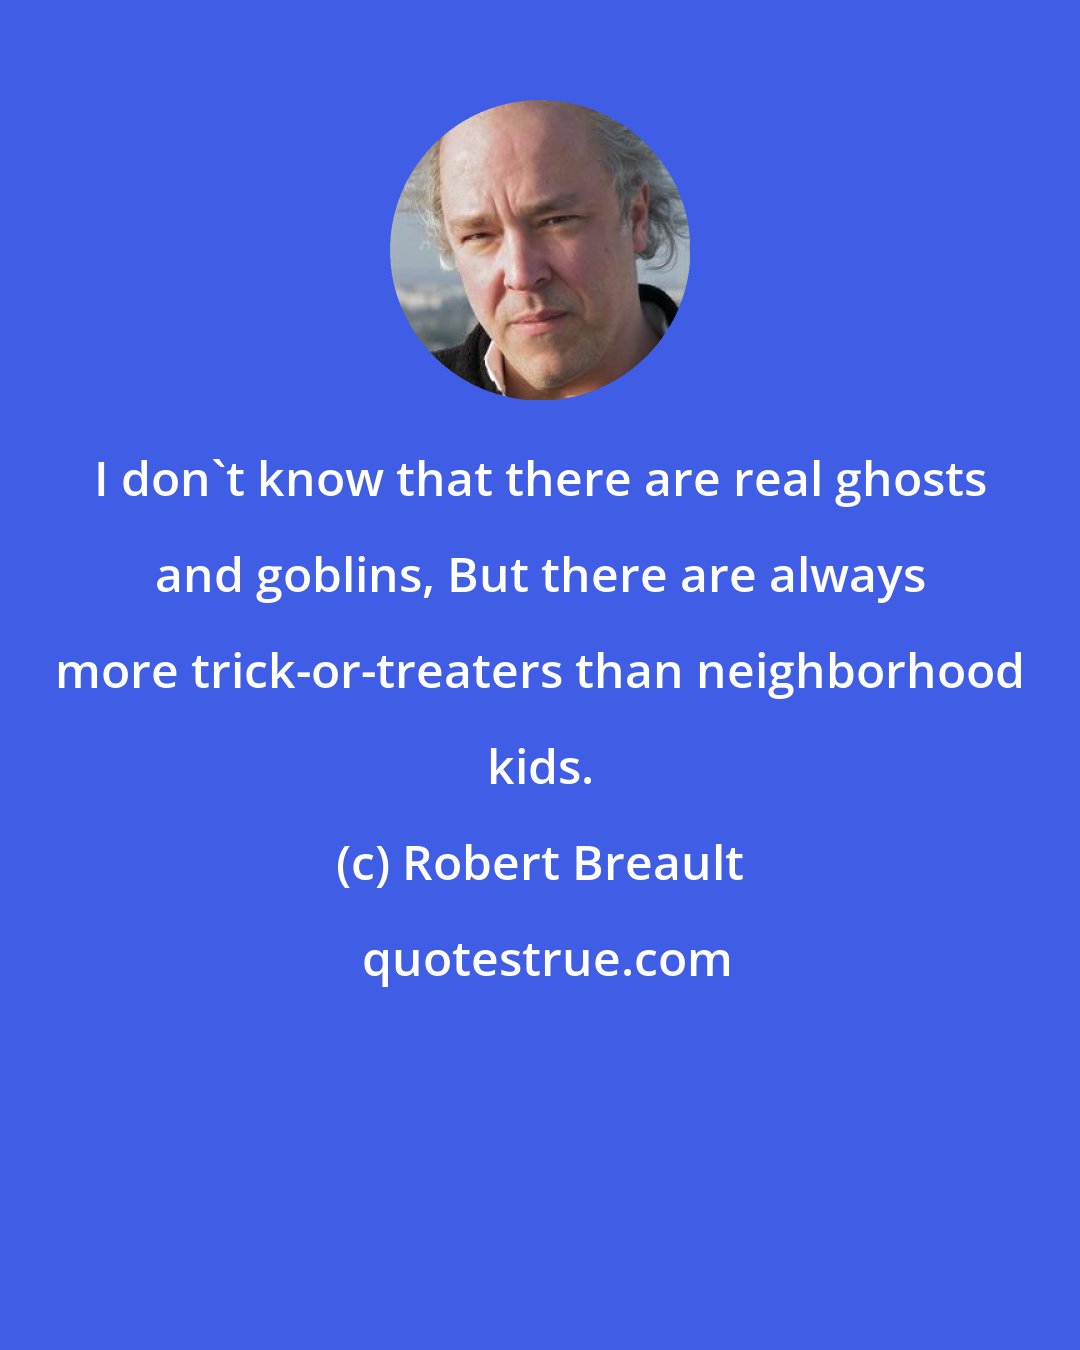 Robert Breault: I don't know that there are real ghosts and goblins, But there are always more trick-or-treaters than neighborhood kids.